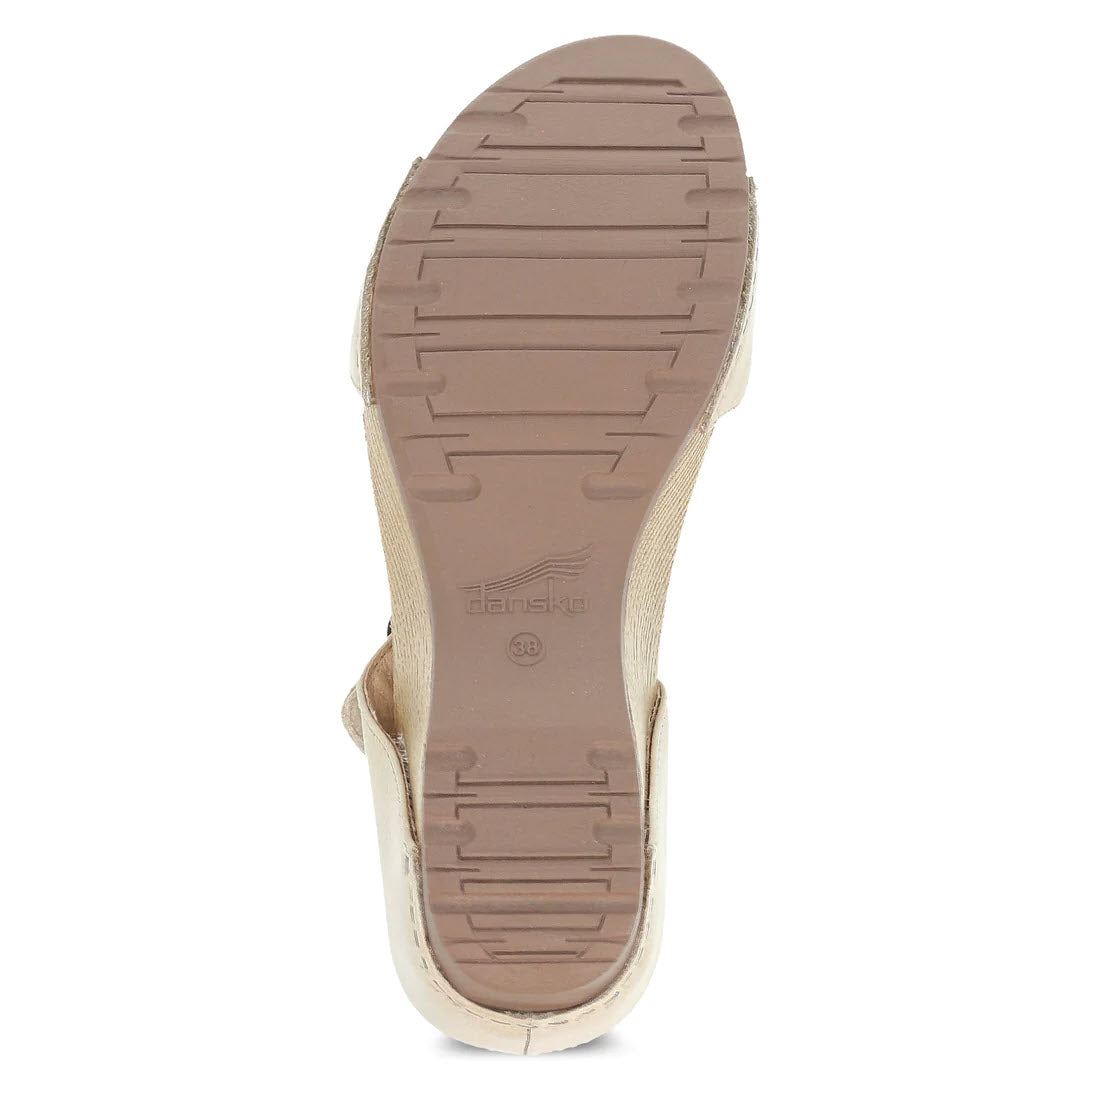 Beige slide sandal with a strap, viewed from the bottom showing a textured rubber outsole with Dansko logo imprint.